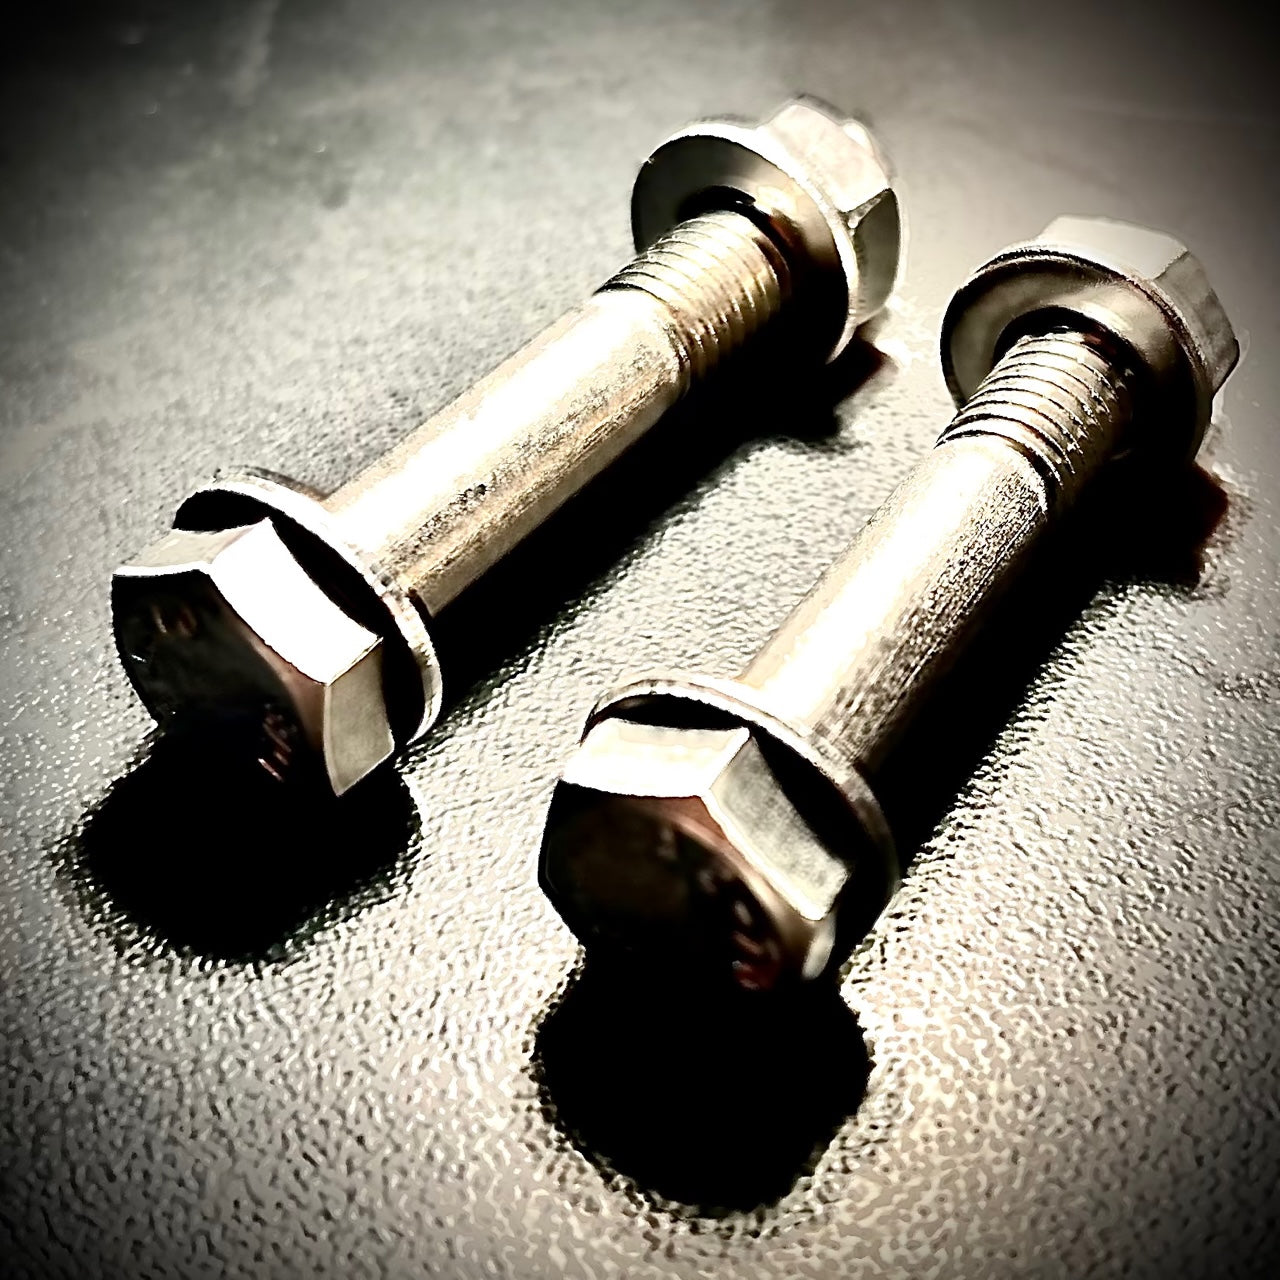 M20 x Over 140mm Hex Bolt plus Nut and Washers A2/ 304 Stainless Steel DIN 931 - Fixaball Ltd. Fixings and Fasteners UK